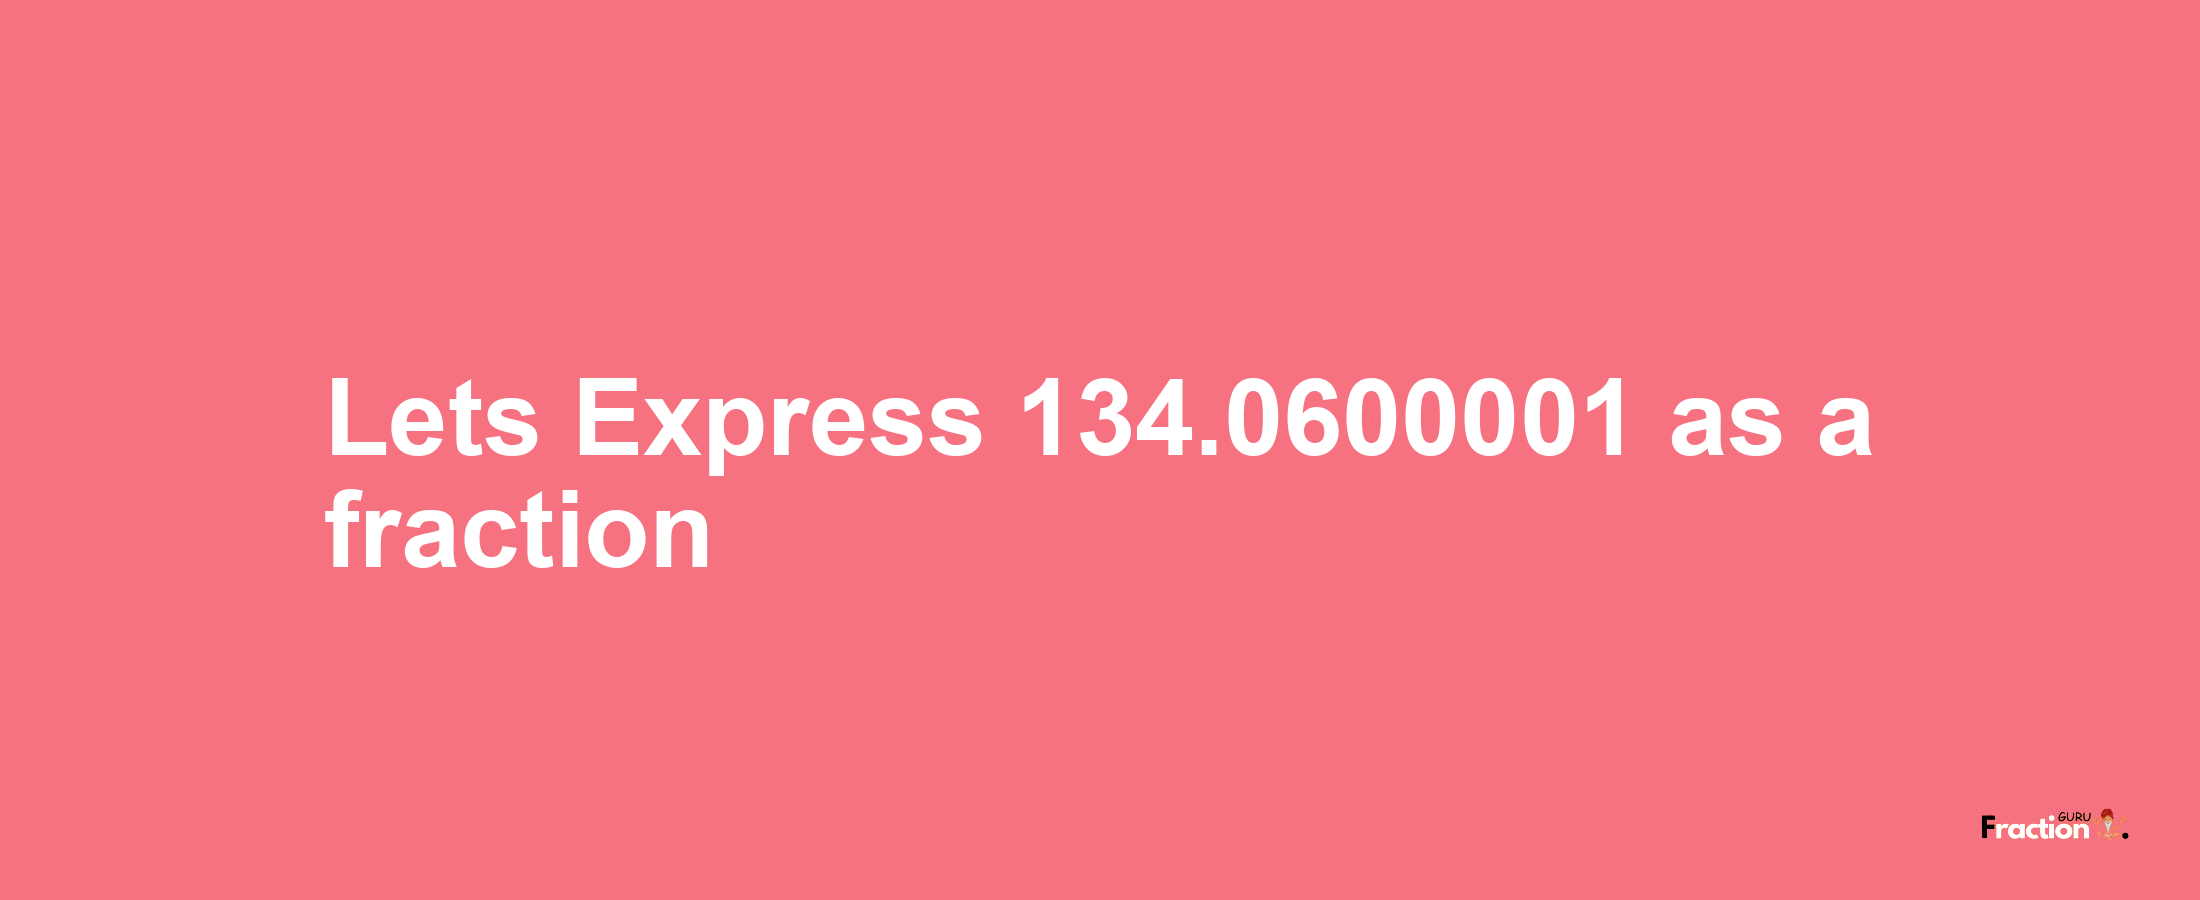 Lets Express 134.0600001 as afraction